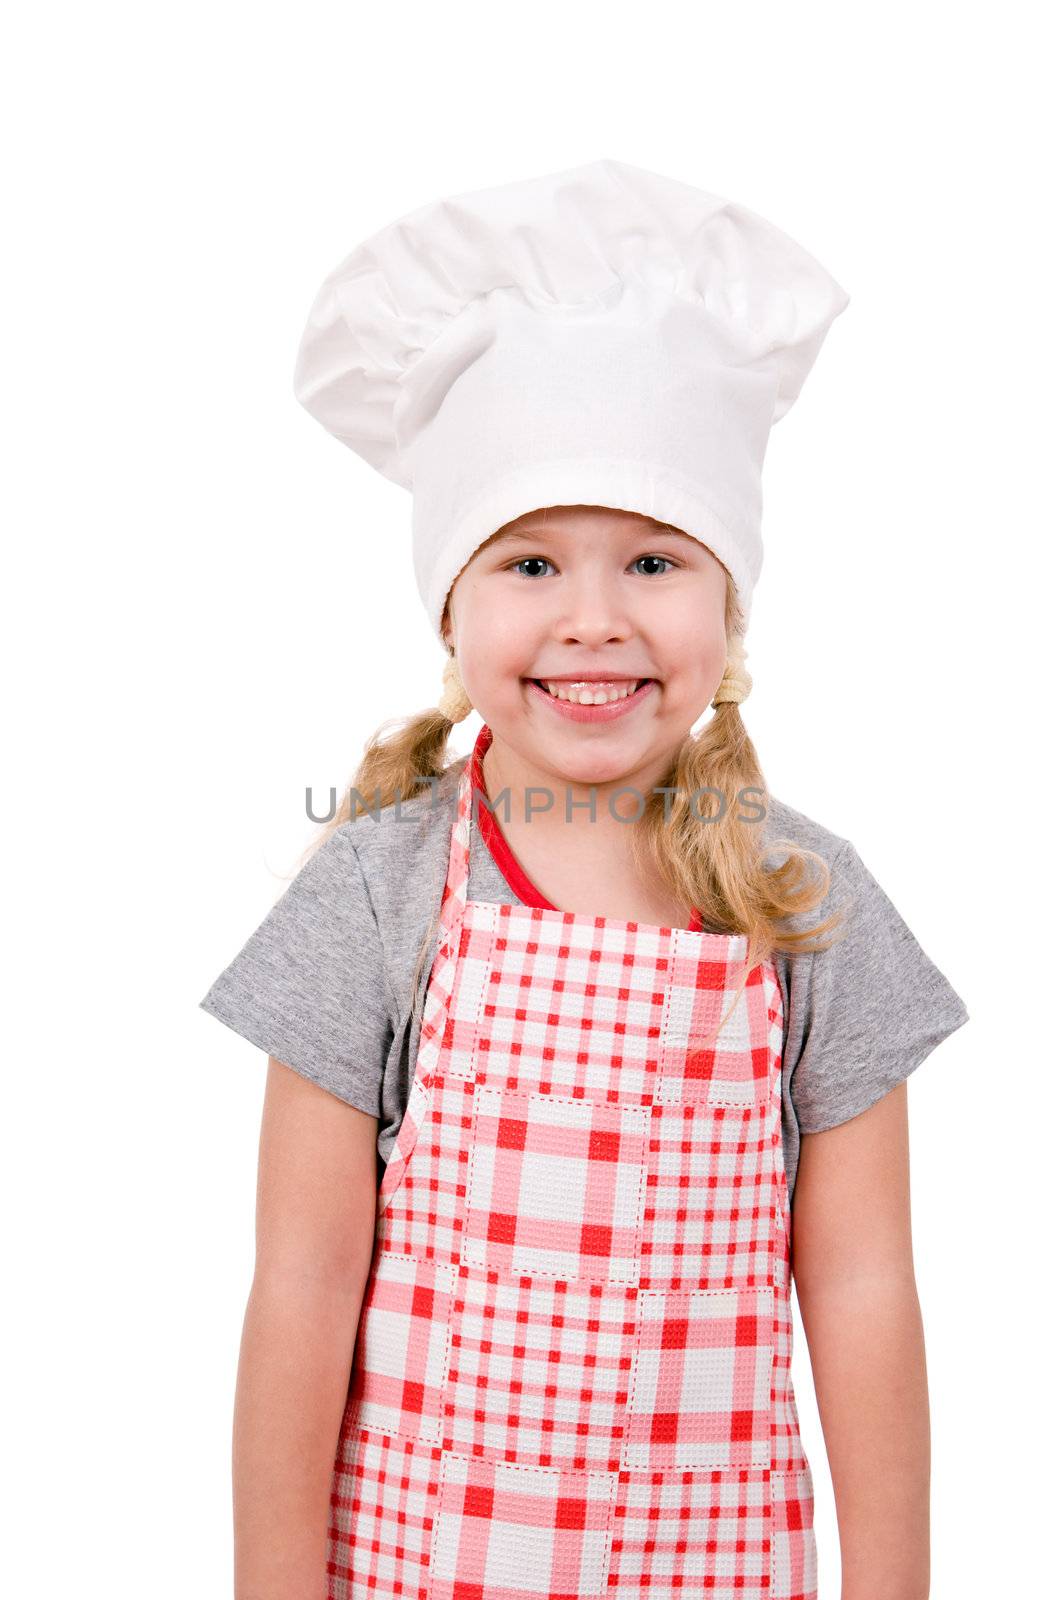 girl in chef's hat isolated on white background